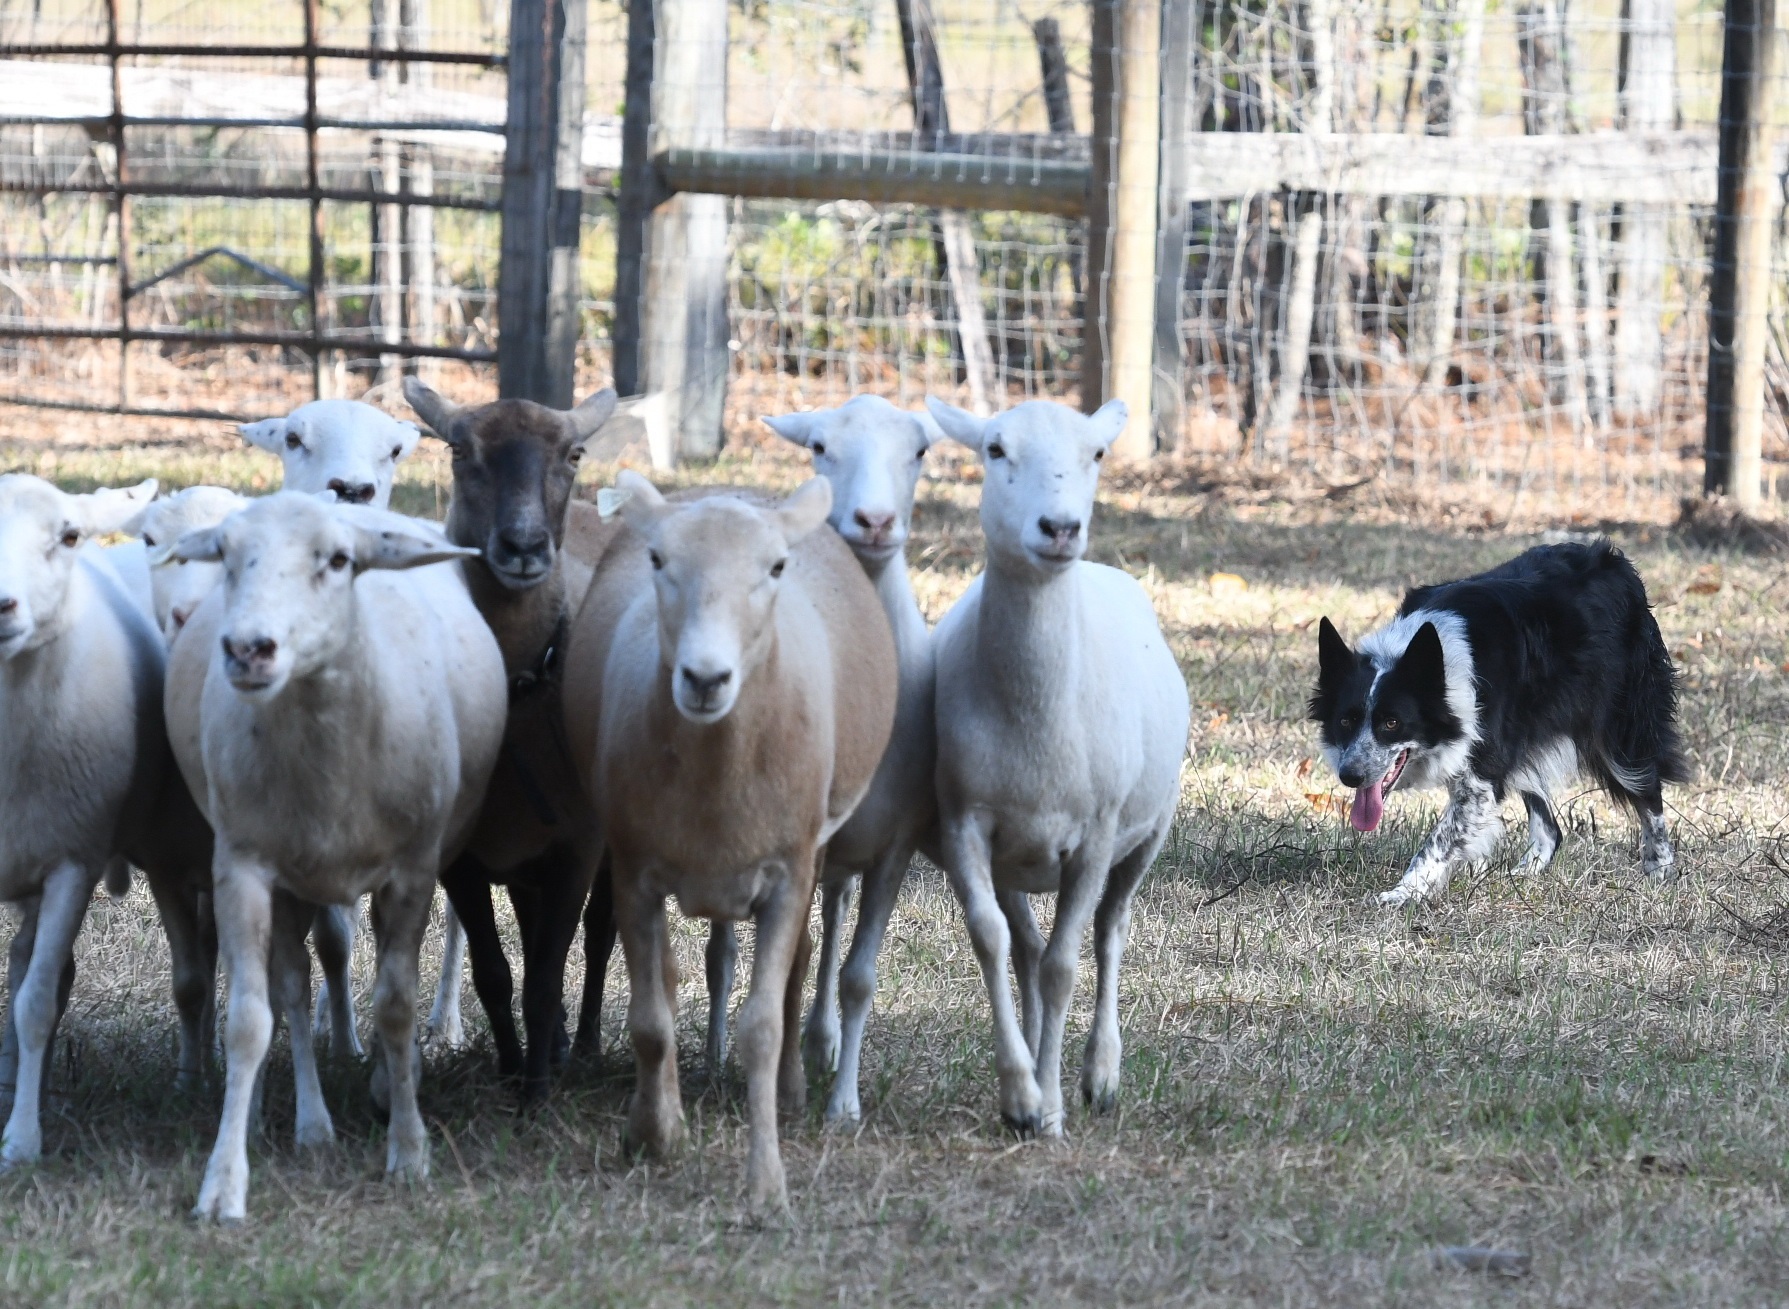 Goats To Go Presents at Invasive Species Management Conference